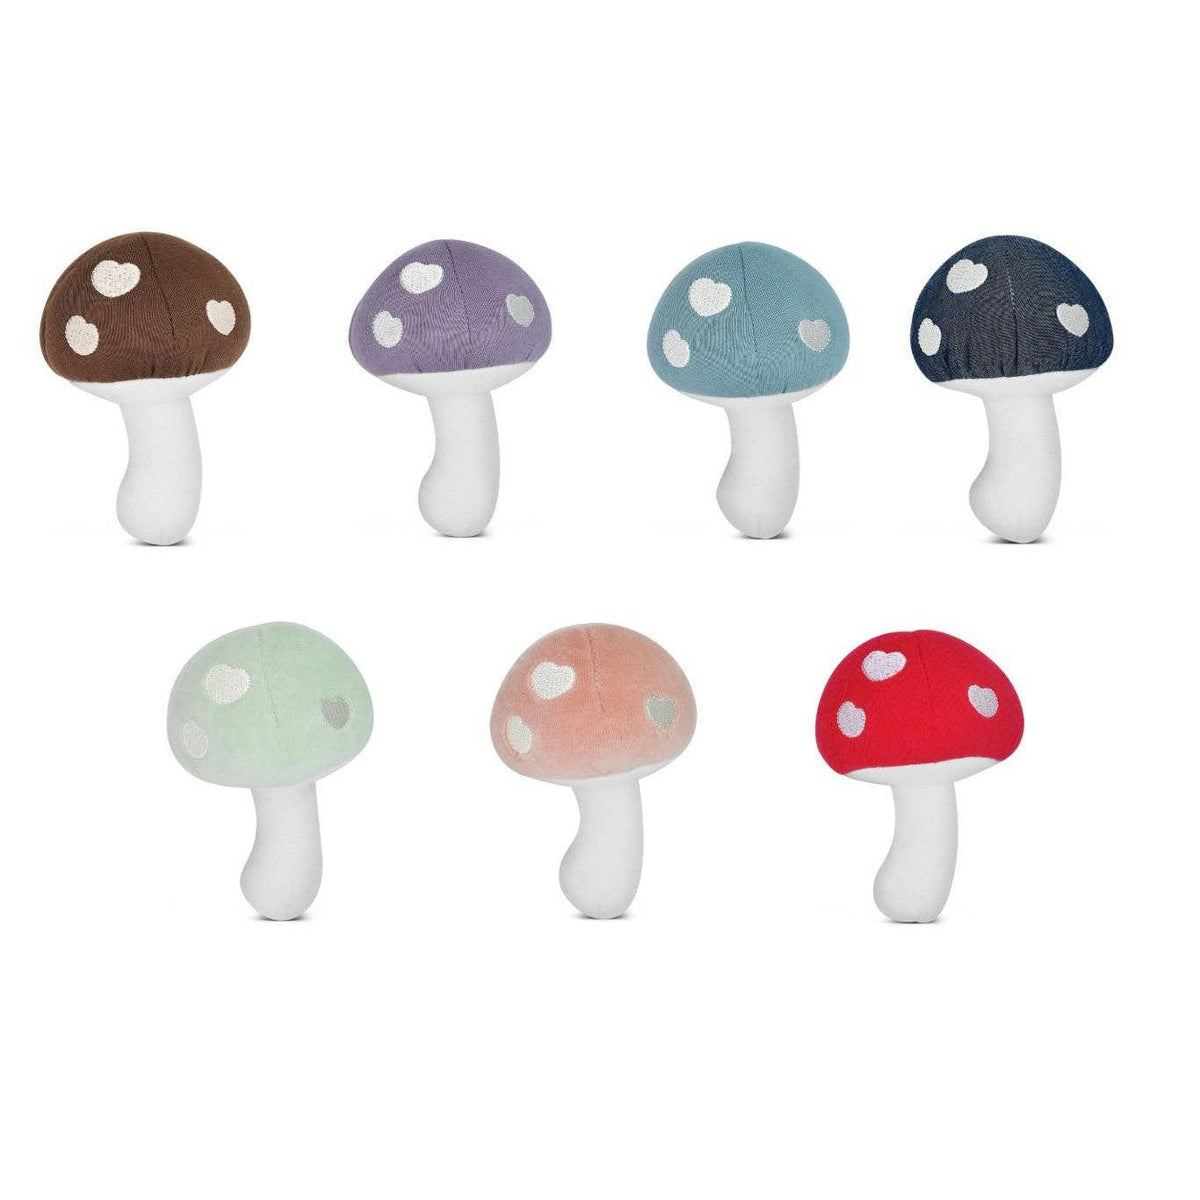 Front view of all of the colors of the Mushroom Rattles including: caramel, lavender, teal, chambray, mint velour, pink velour and red.